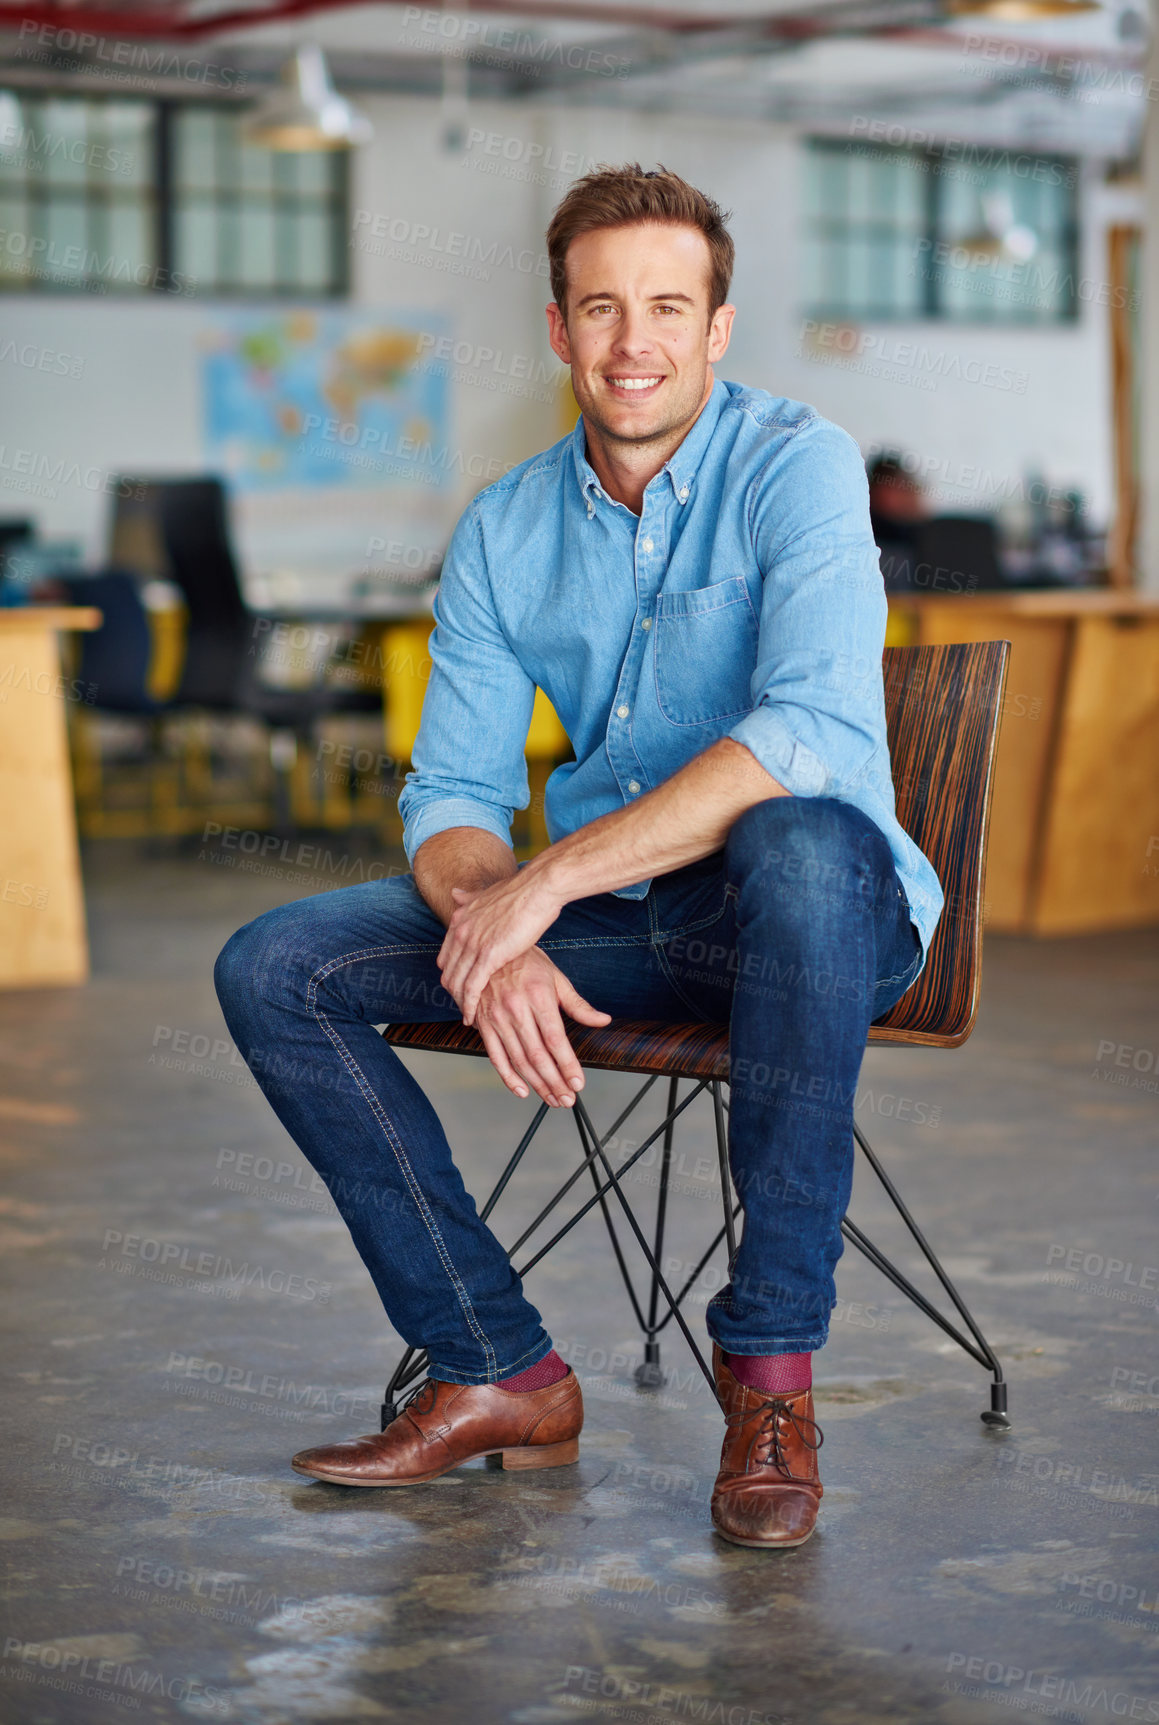 Buy stock photo Portrait of a handsome young designer sitting on a chair in an office